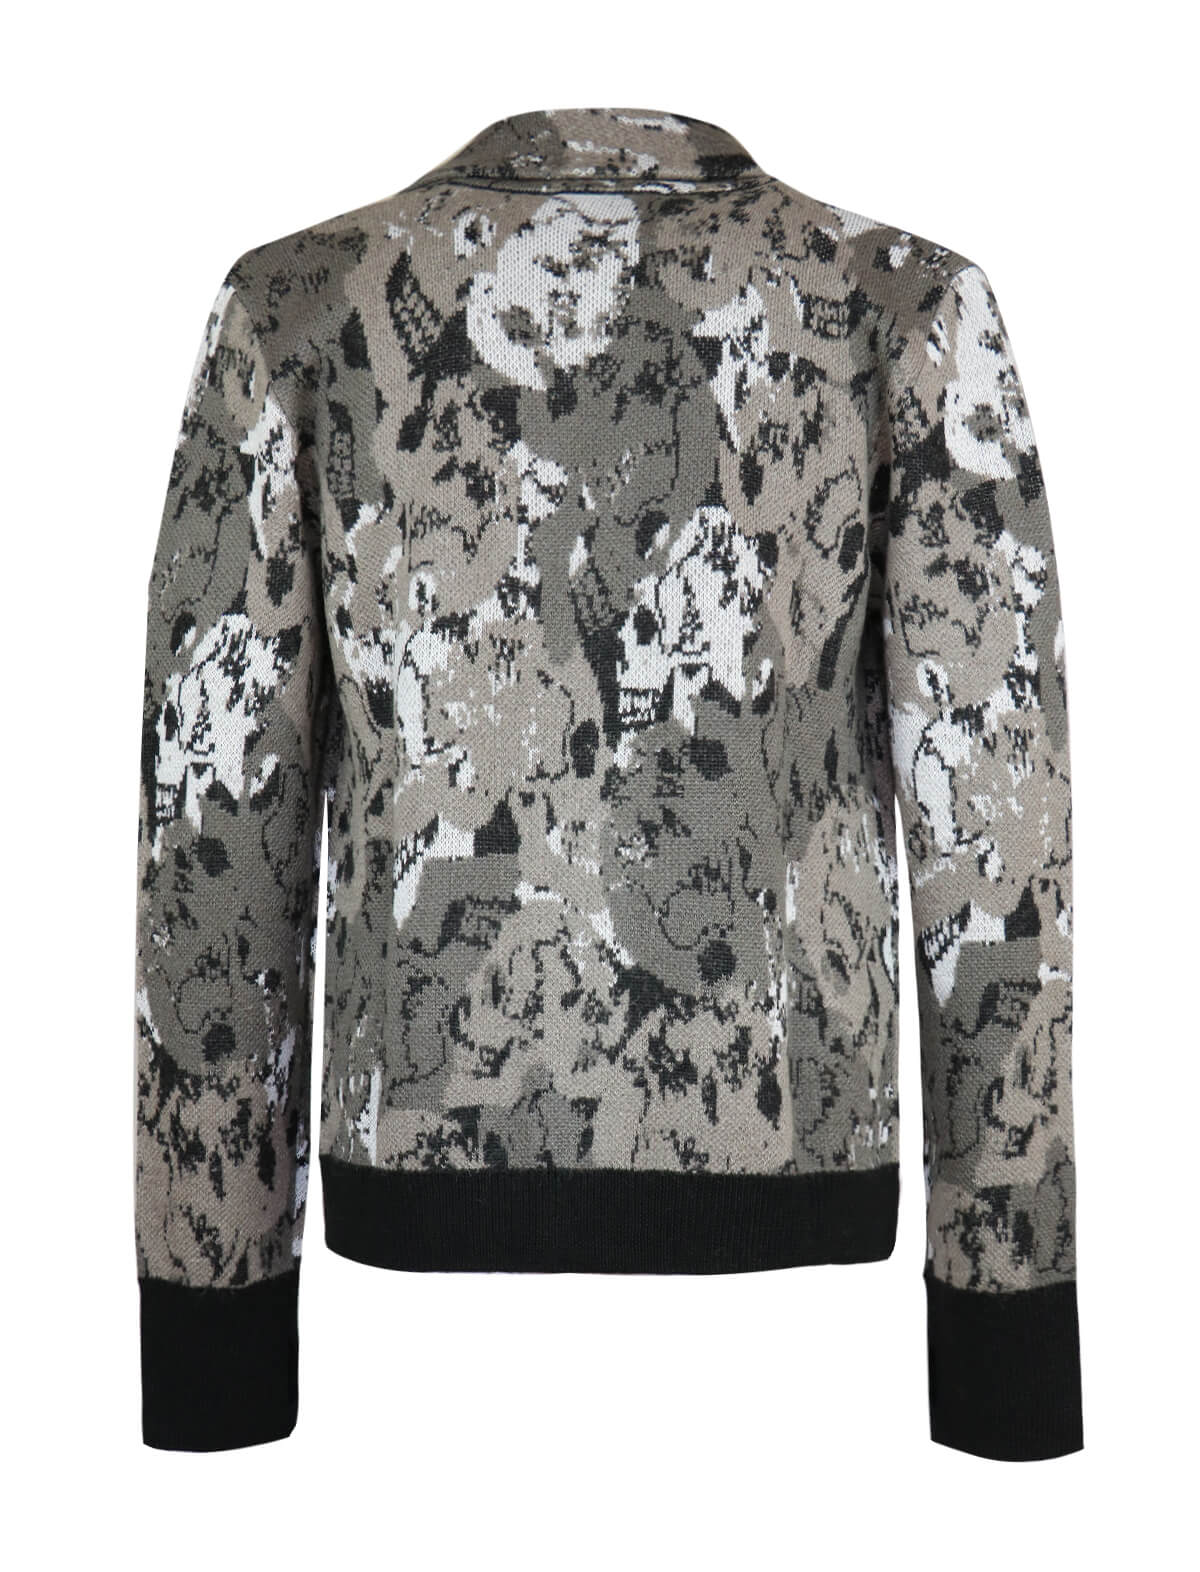 GABRIELE PASINI Knitted Cardigan in Graphic Grey